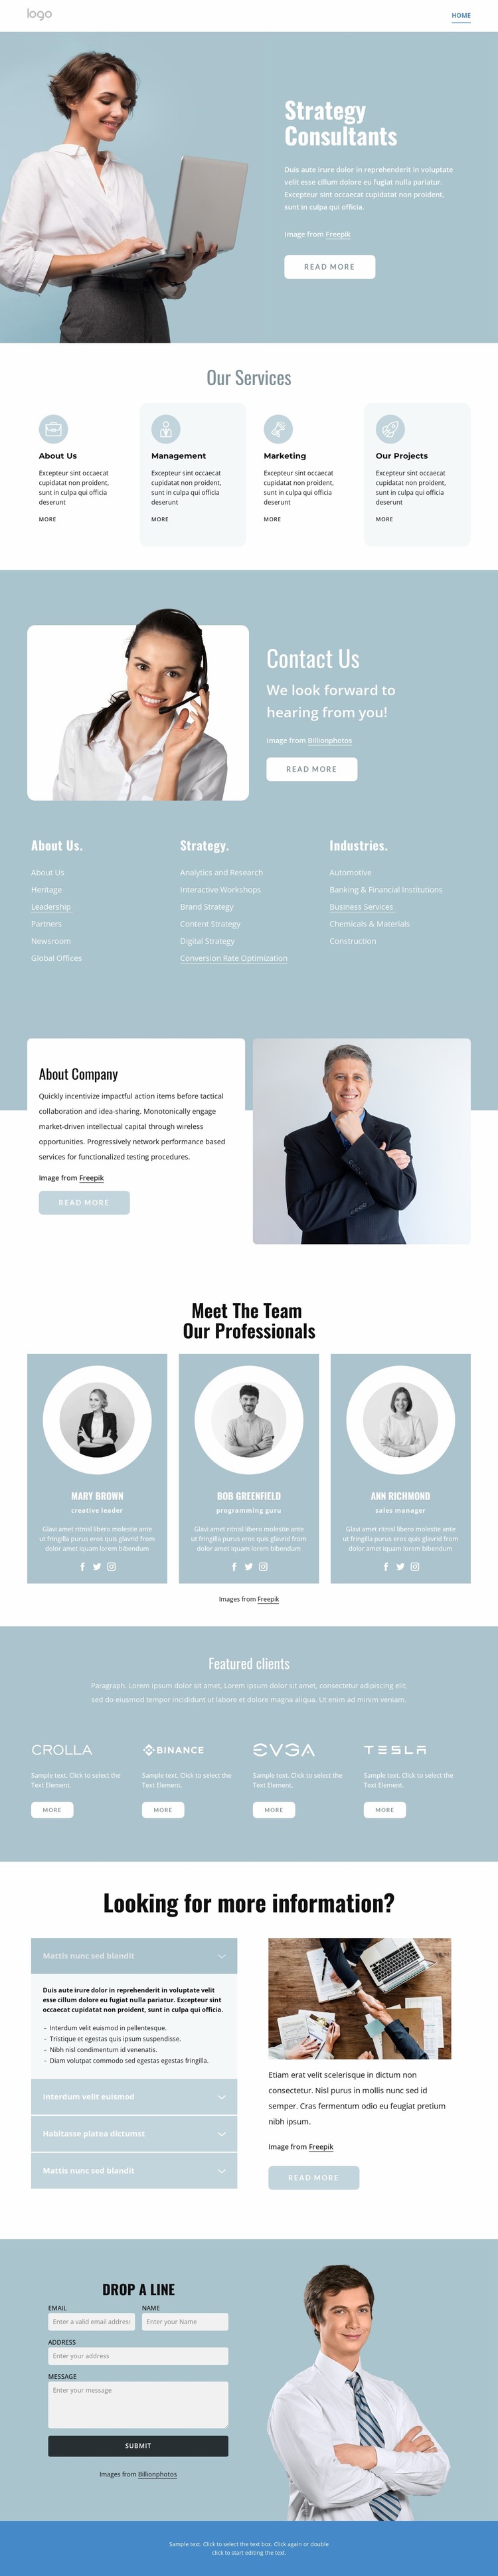 Strategy connsultants Website Builder Templates